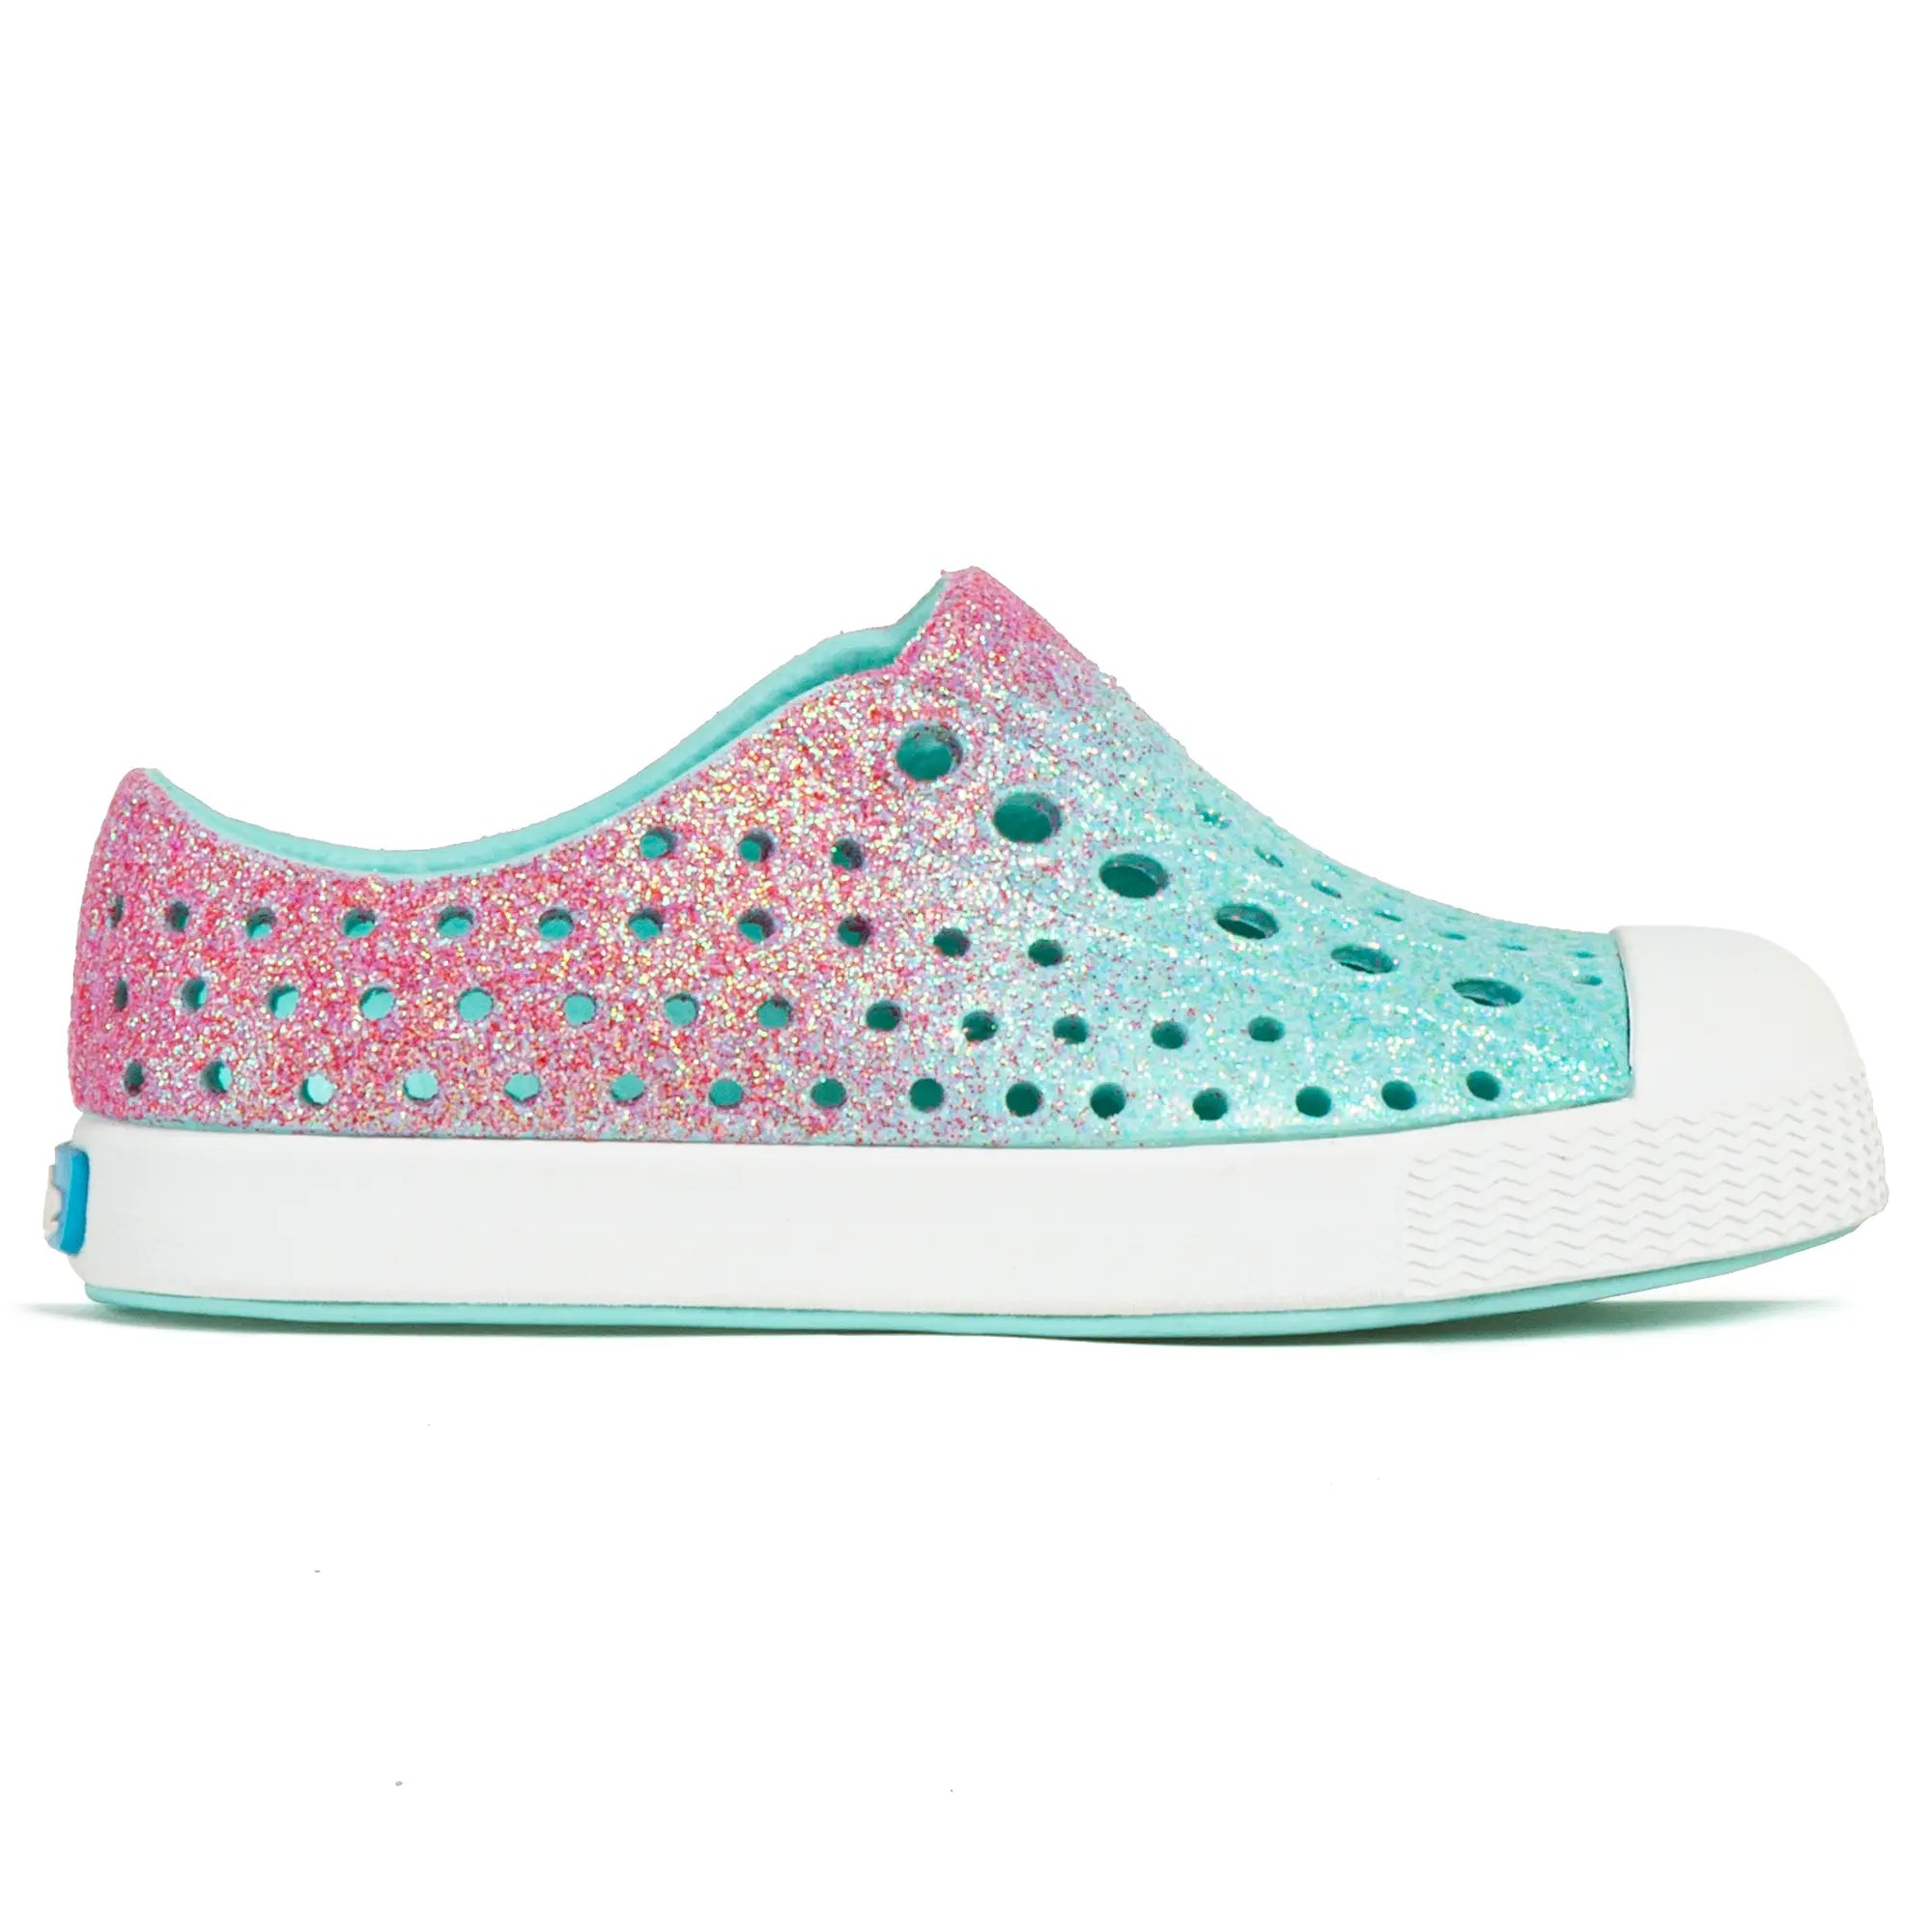 Youth Bling Jefferson Water Shoe - Hollywood